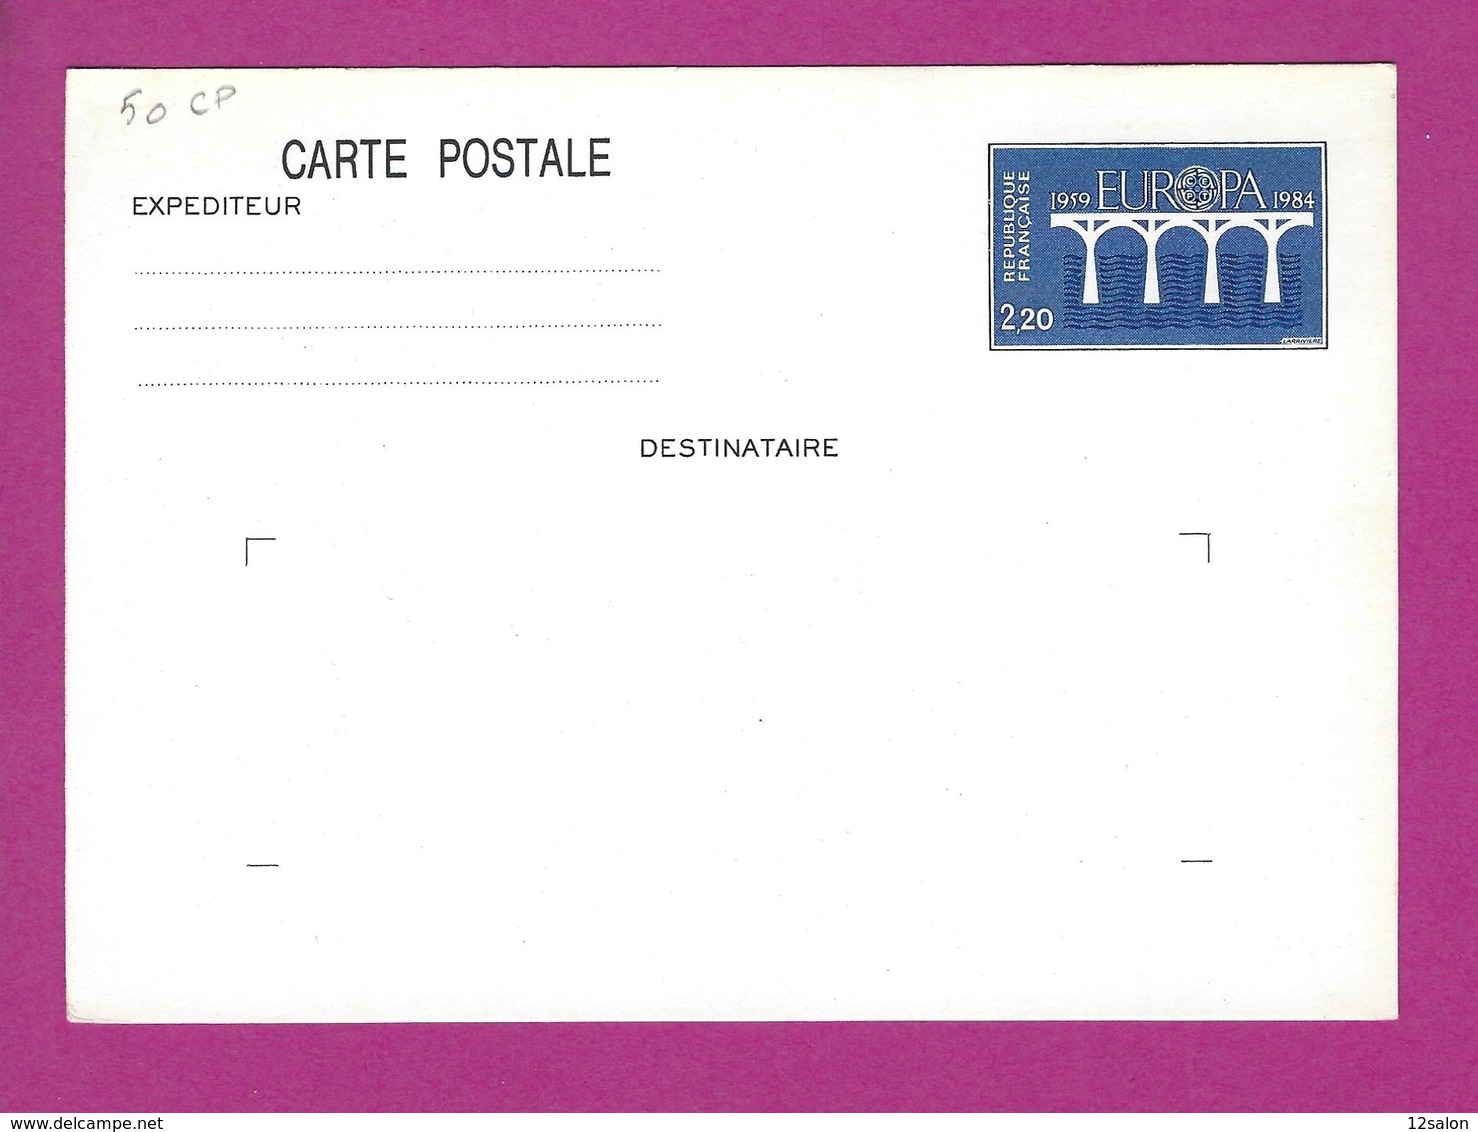 ENTIERS POSTAUX CARTE POSTALE  TYPE EUROPA - Standard Postcards & Stamped On Demand (before 1995)